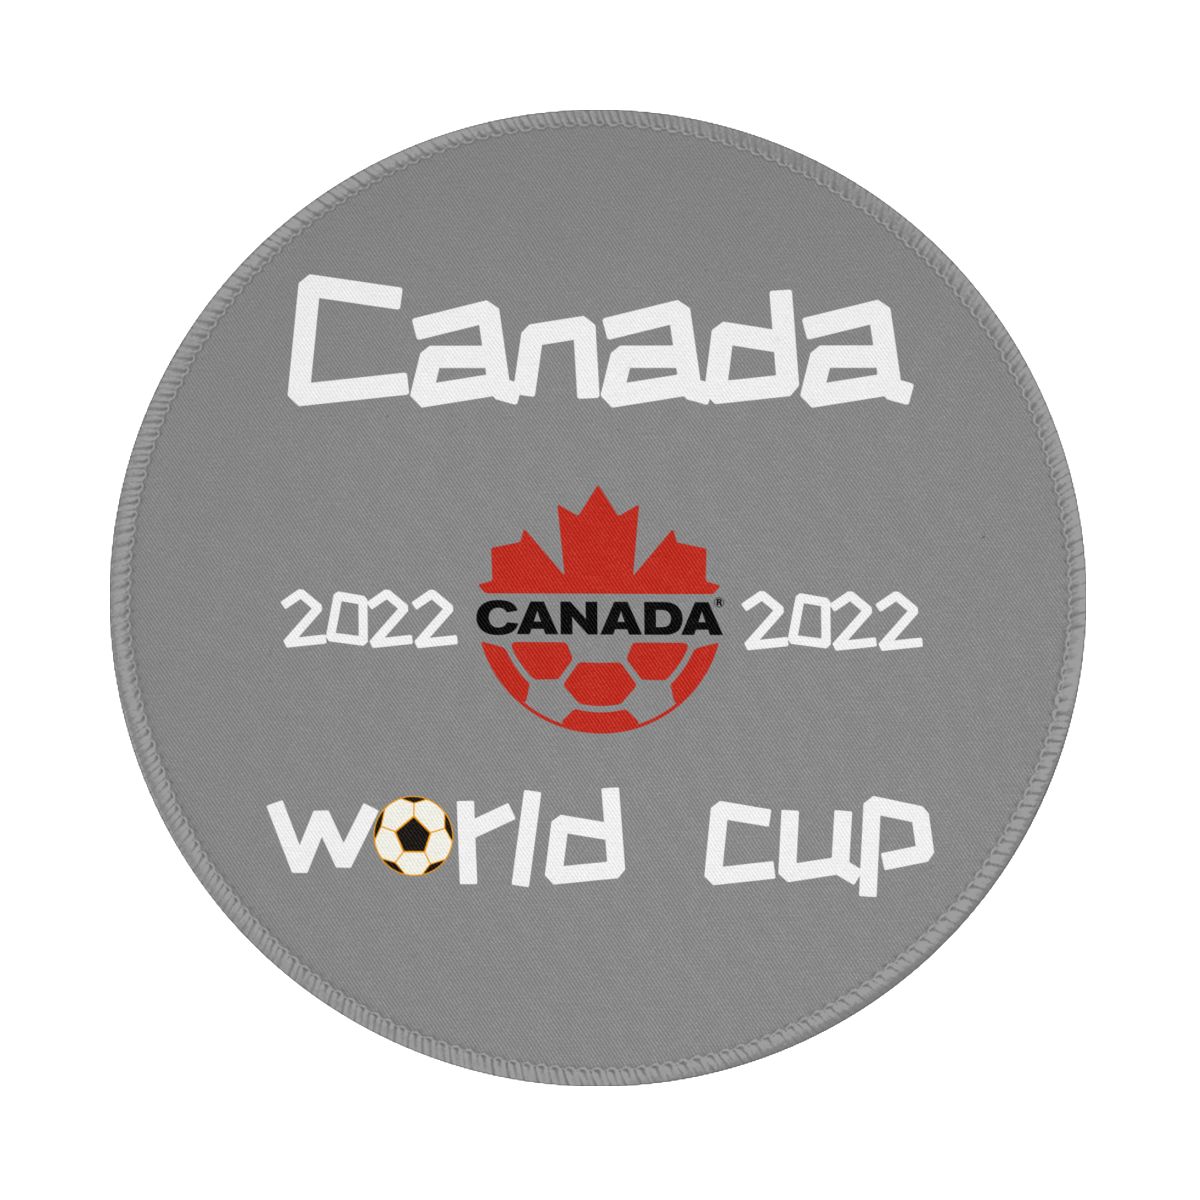 Canada 2022 World Cup Team Logo Gaming Round Mousepad for Computer Laptop